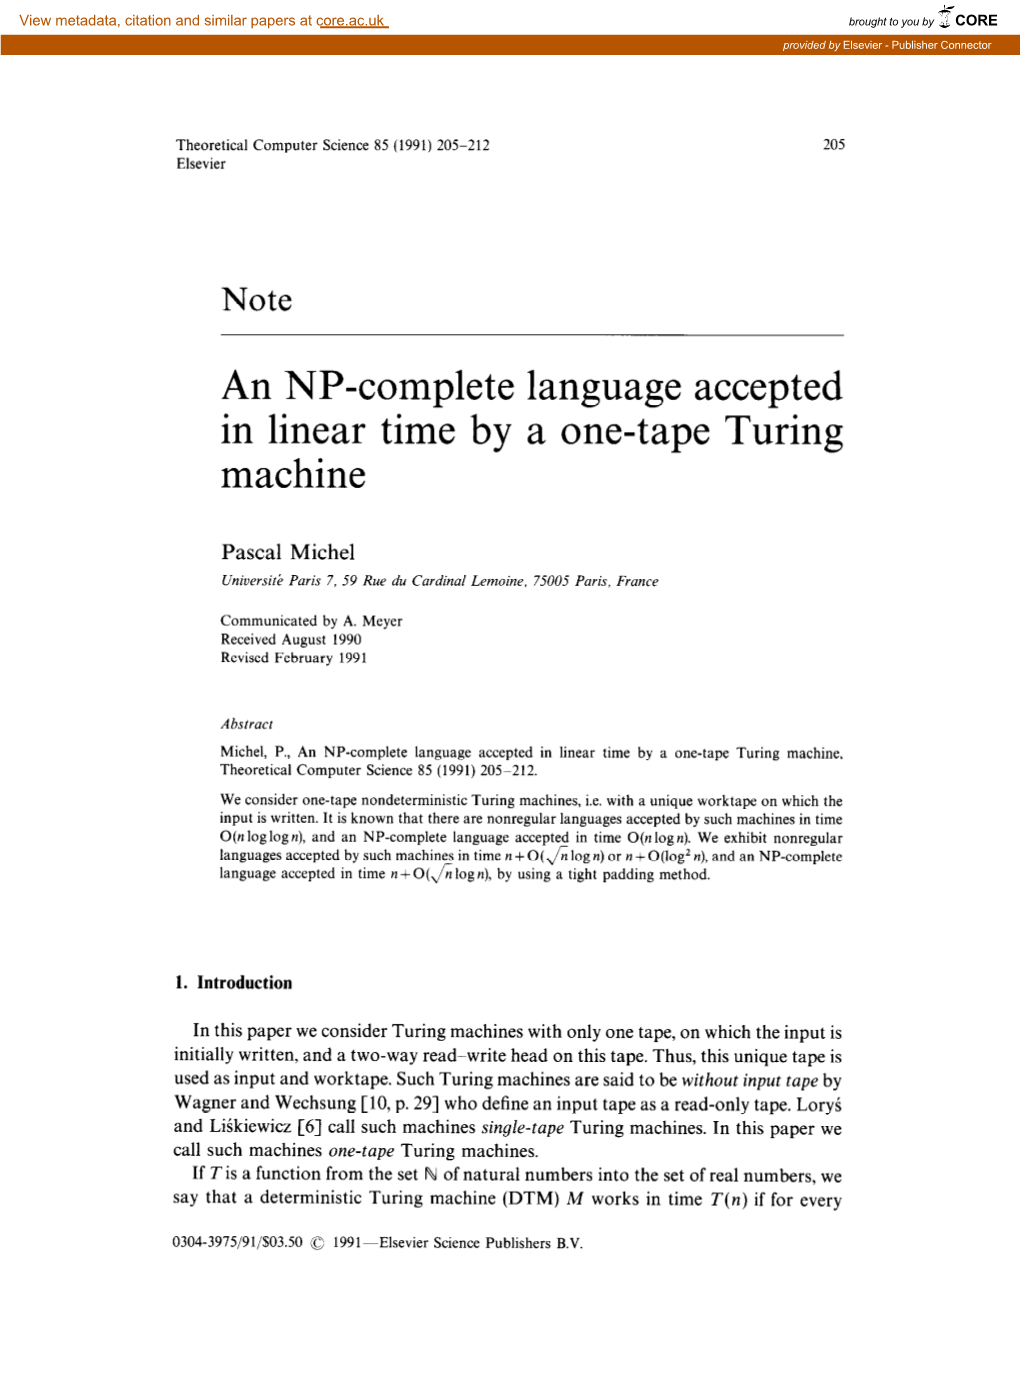 An NP-Complete Language Accepted in Linear Time by a One-Tape Turing Machine